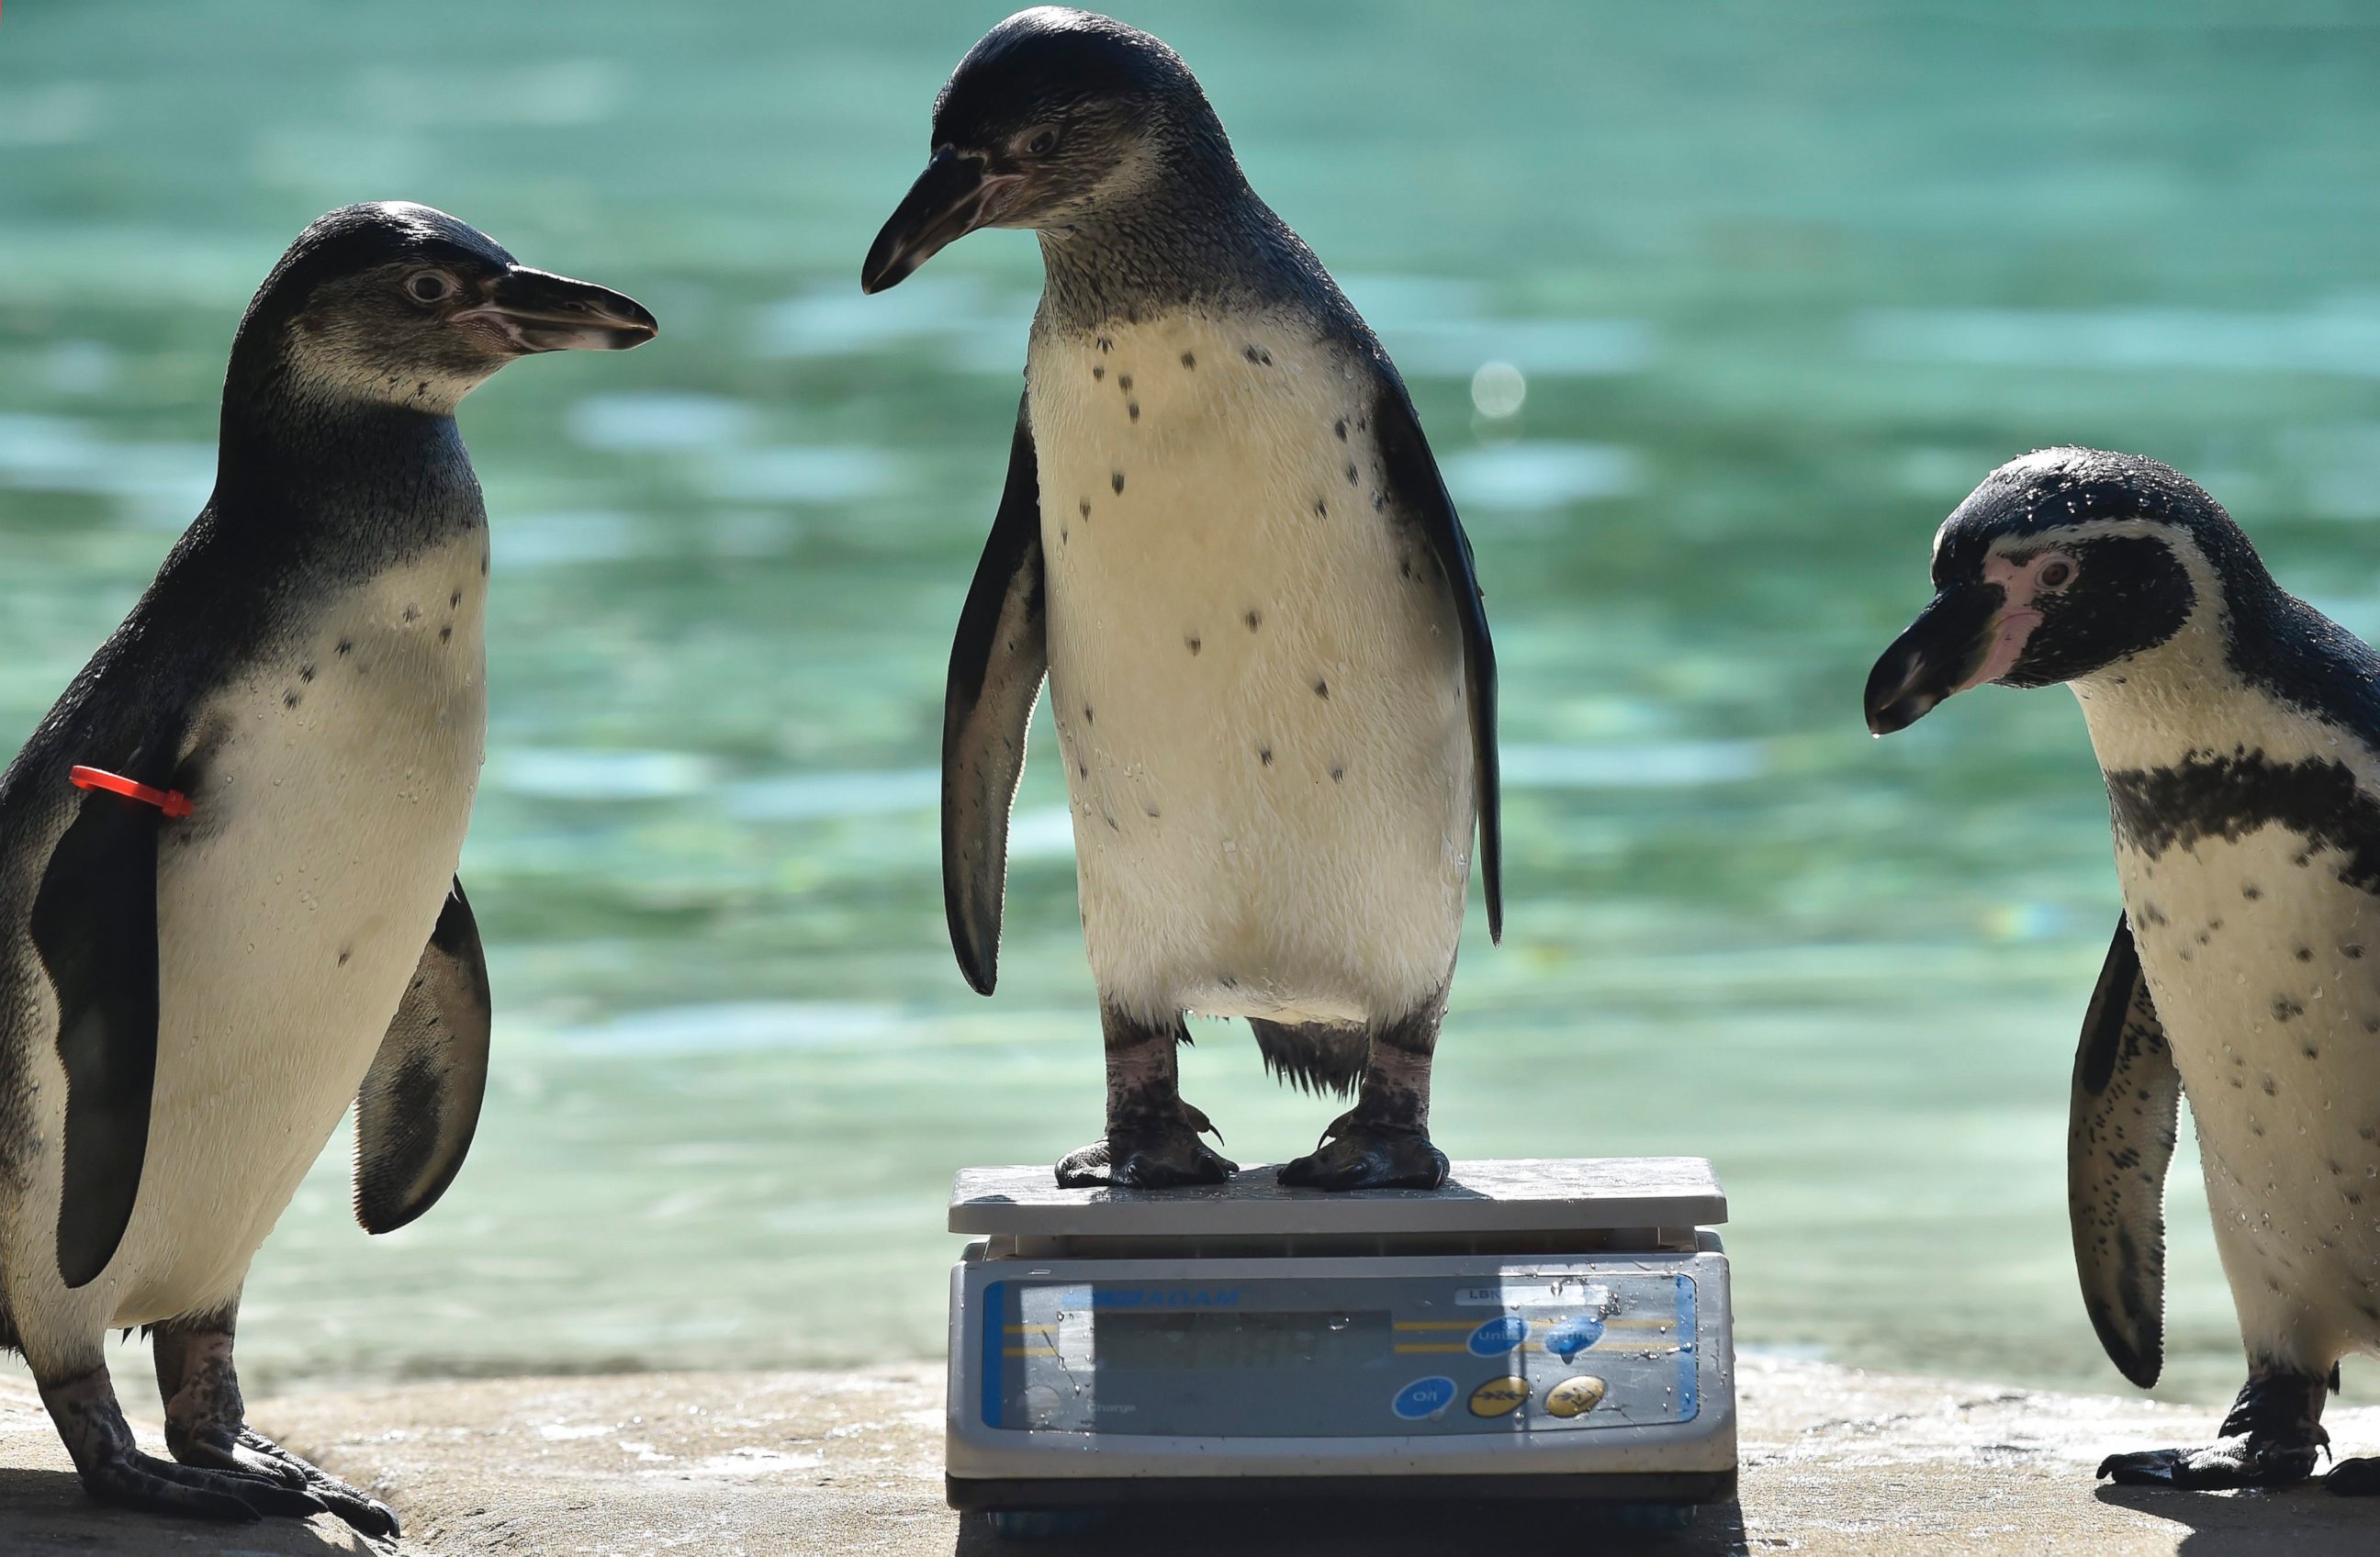 PHOTO: A Humboldt penguin stands on a scale during the annual weigh-in at the London Zoo in London,England August 24, 2016.  Every animal in the zoo is weighed and measured and the statistics recorded so the data can be shared with zoos across the world.